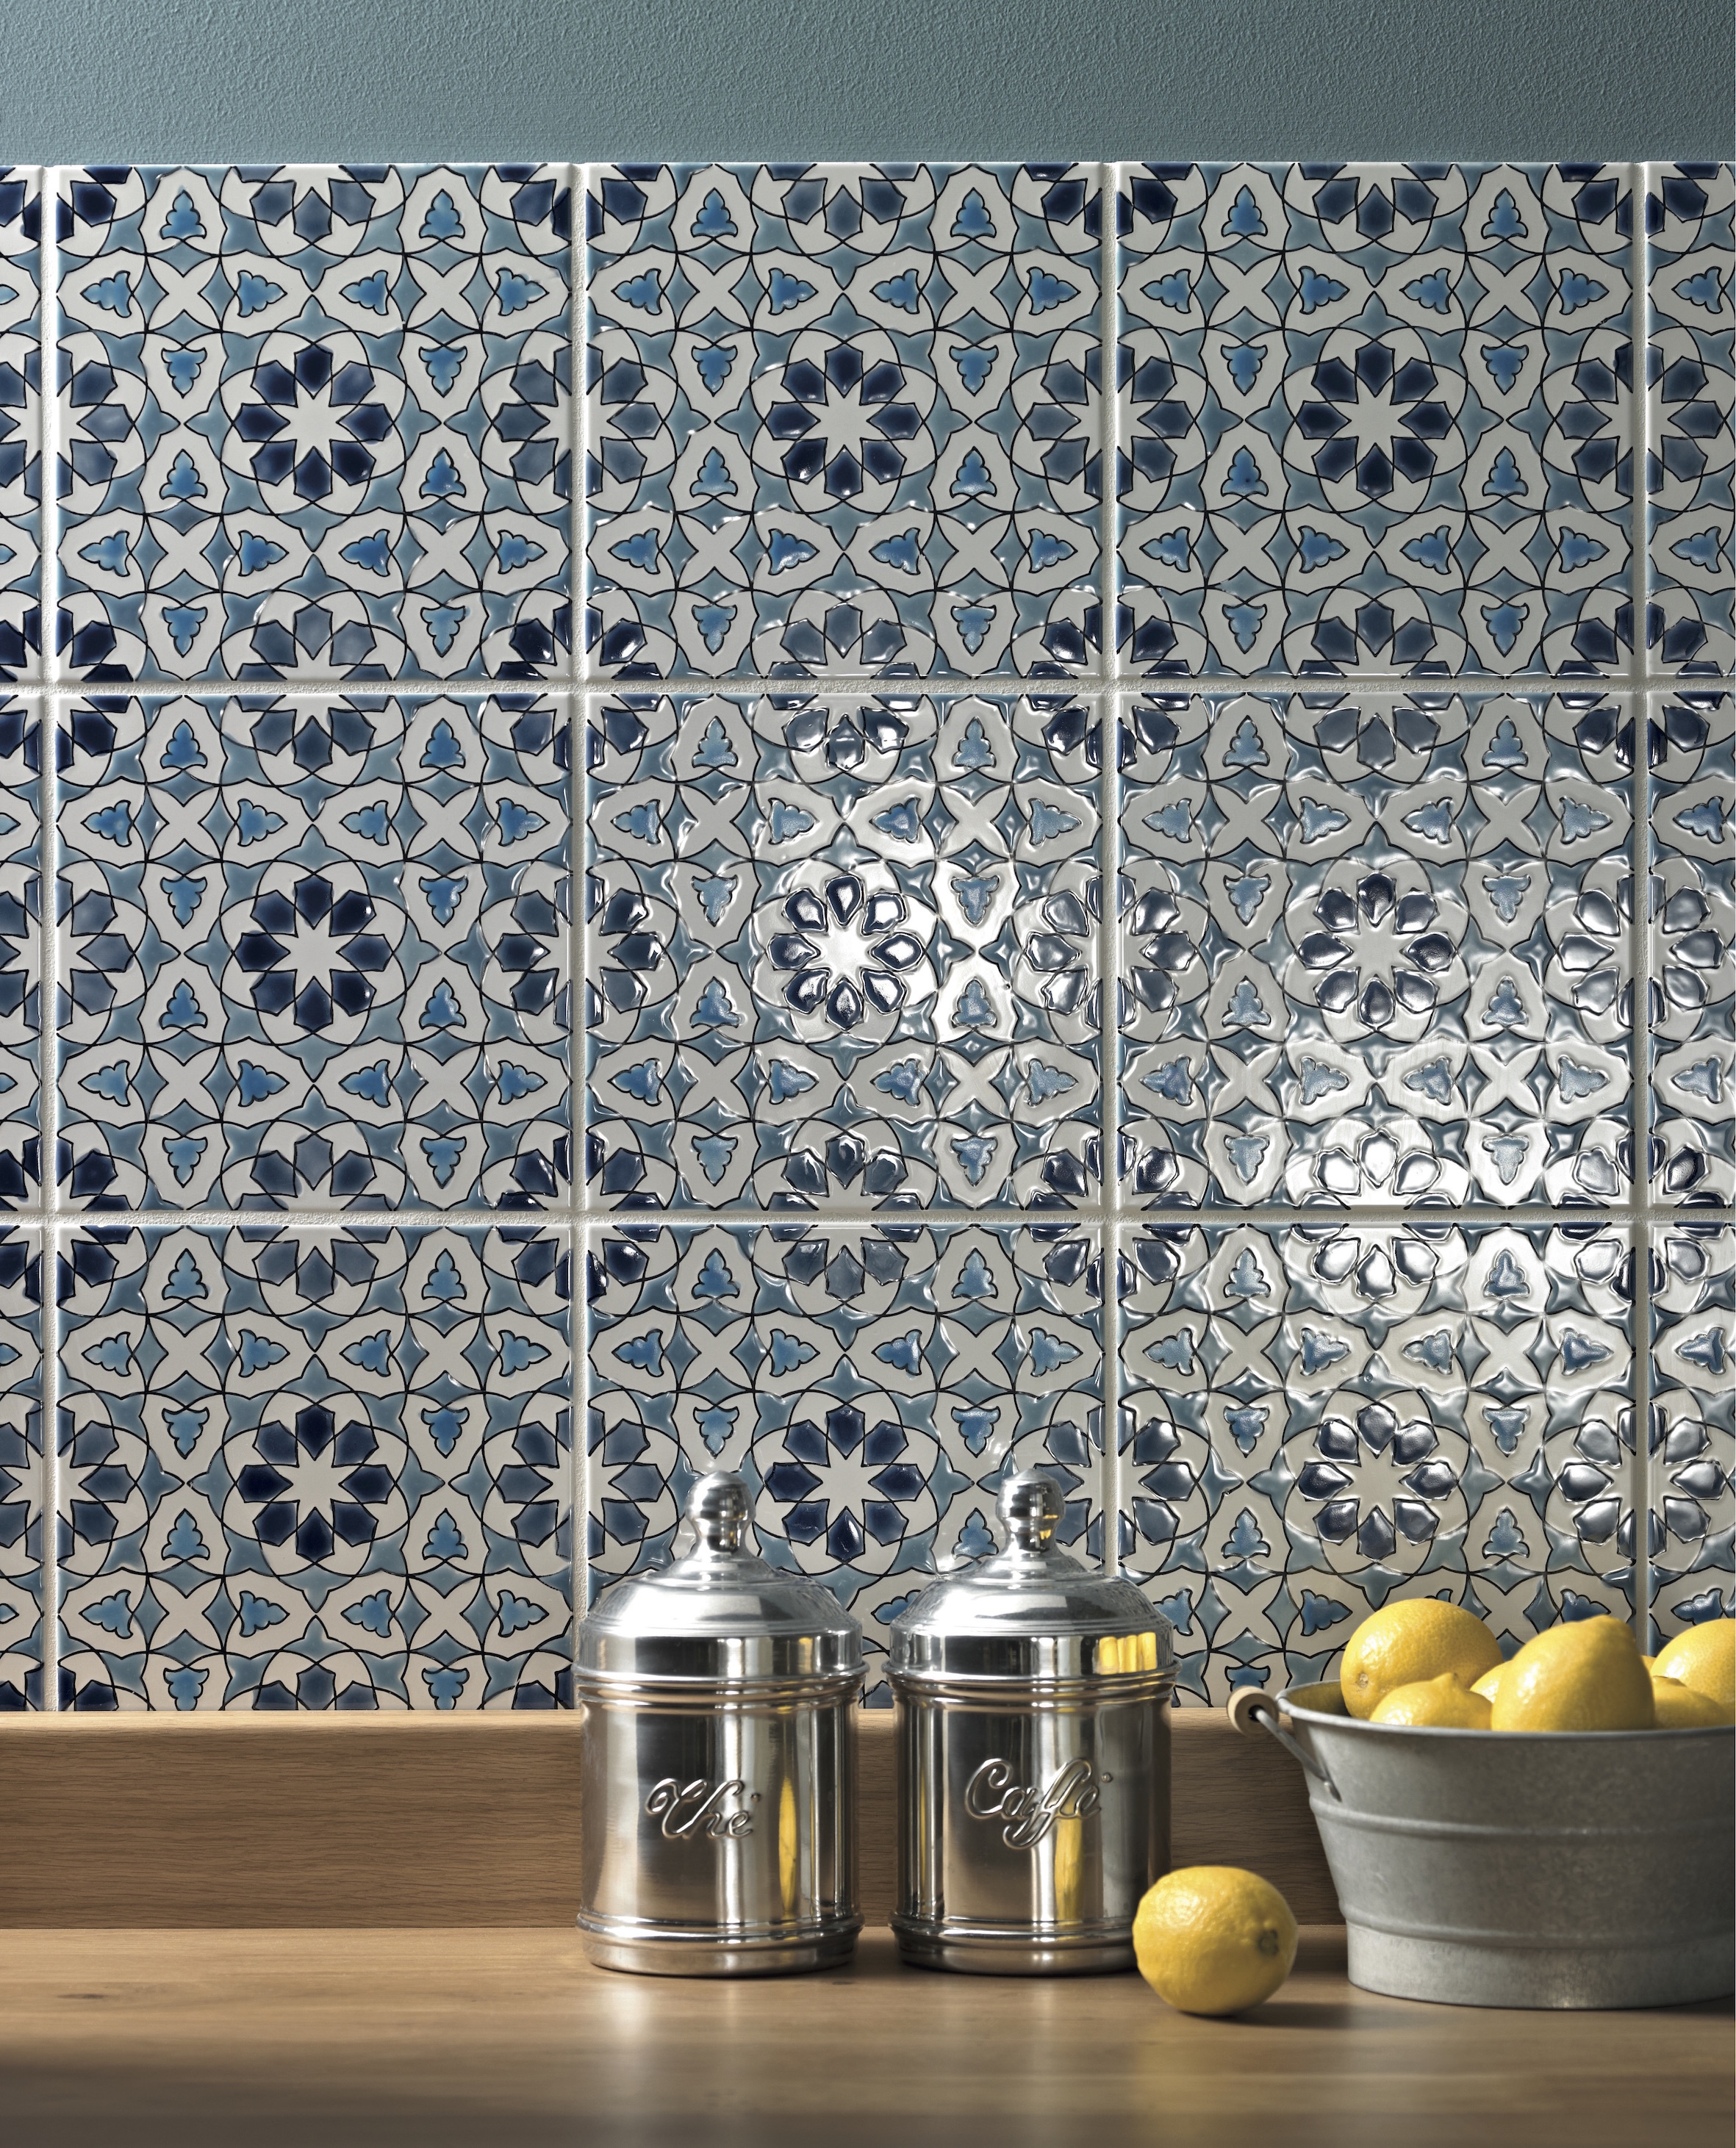 6 Top Tips For Choosing The Perfect Kitchen Tiles – Express Kitchens